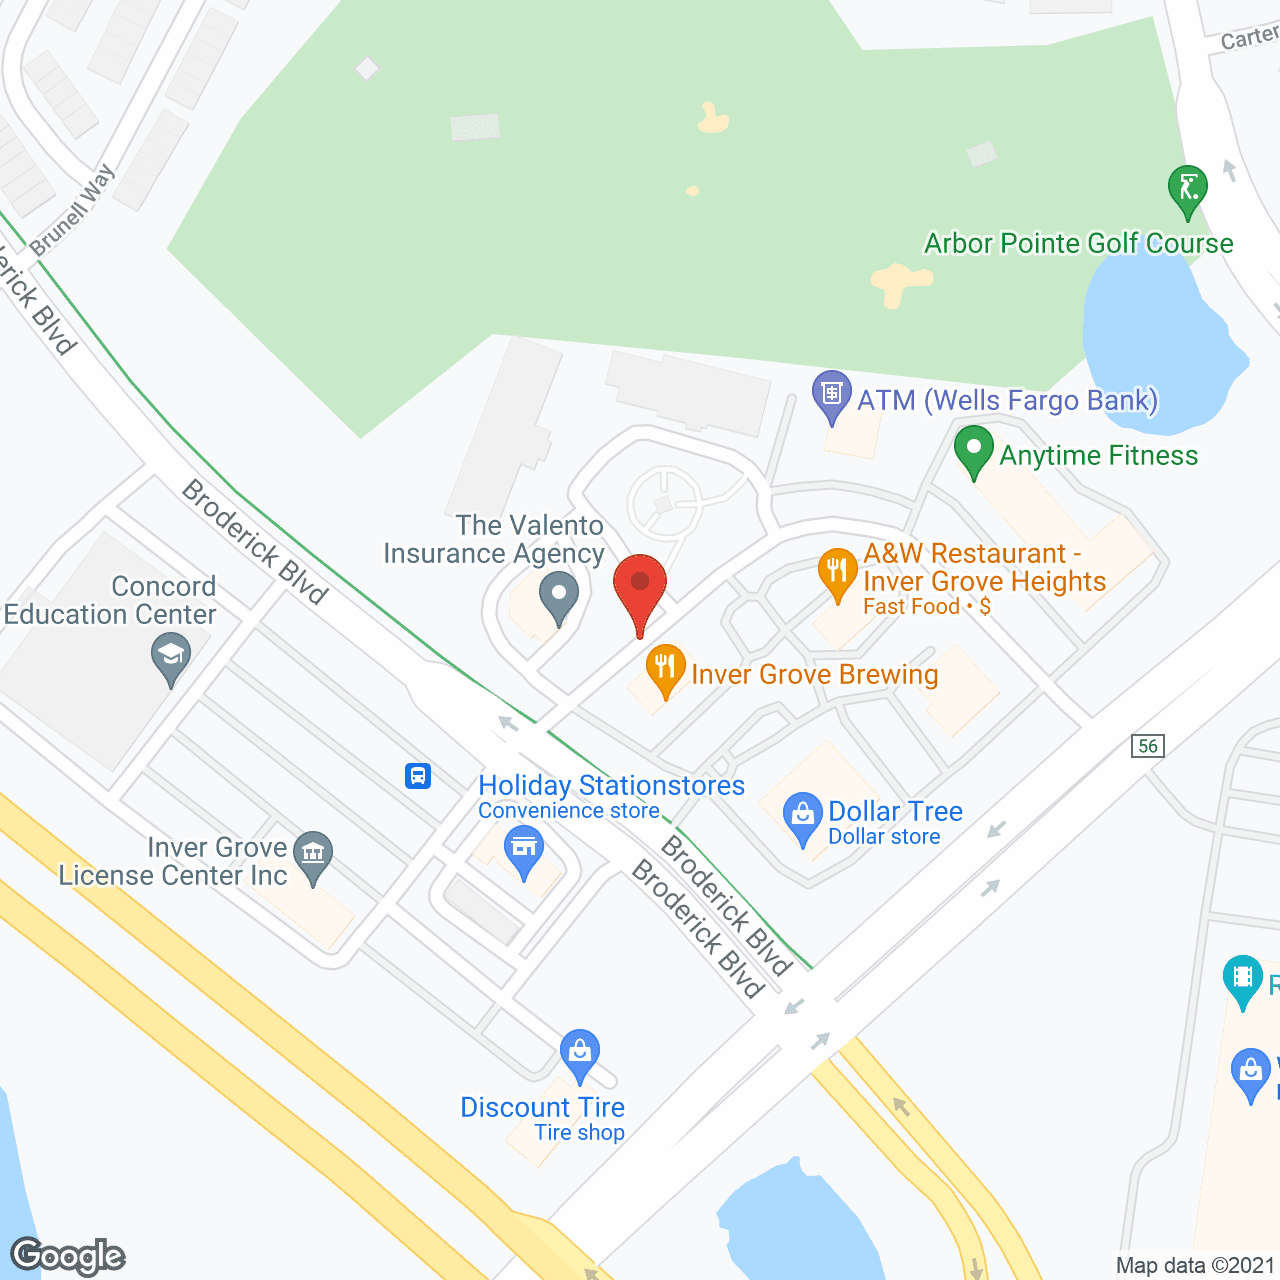 White Pines Advanced Memory Care and Men's Memory Care-Inver Grove Heights in google map